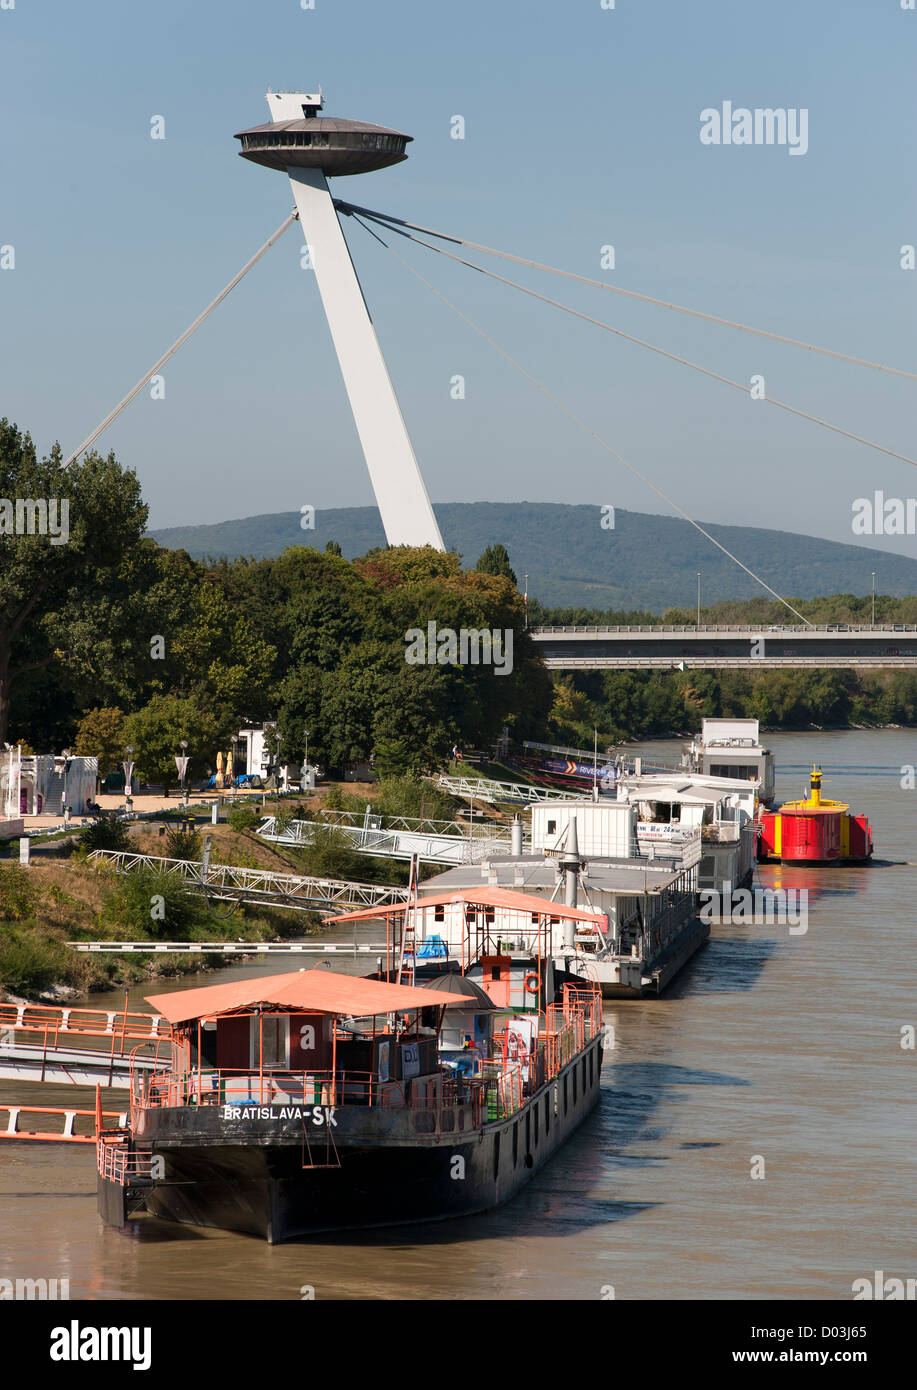 The observation deck and structure of the New Bridge (Novy Most) over the Danube River in Bratislava, the capital of Slovakia. Stock Photo